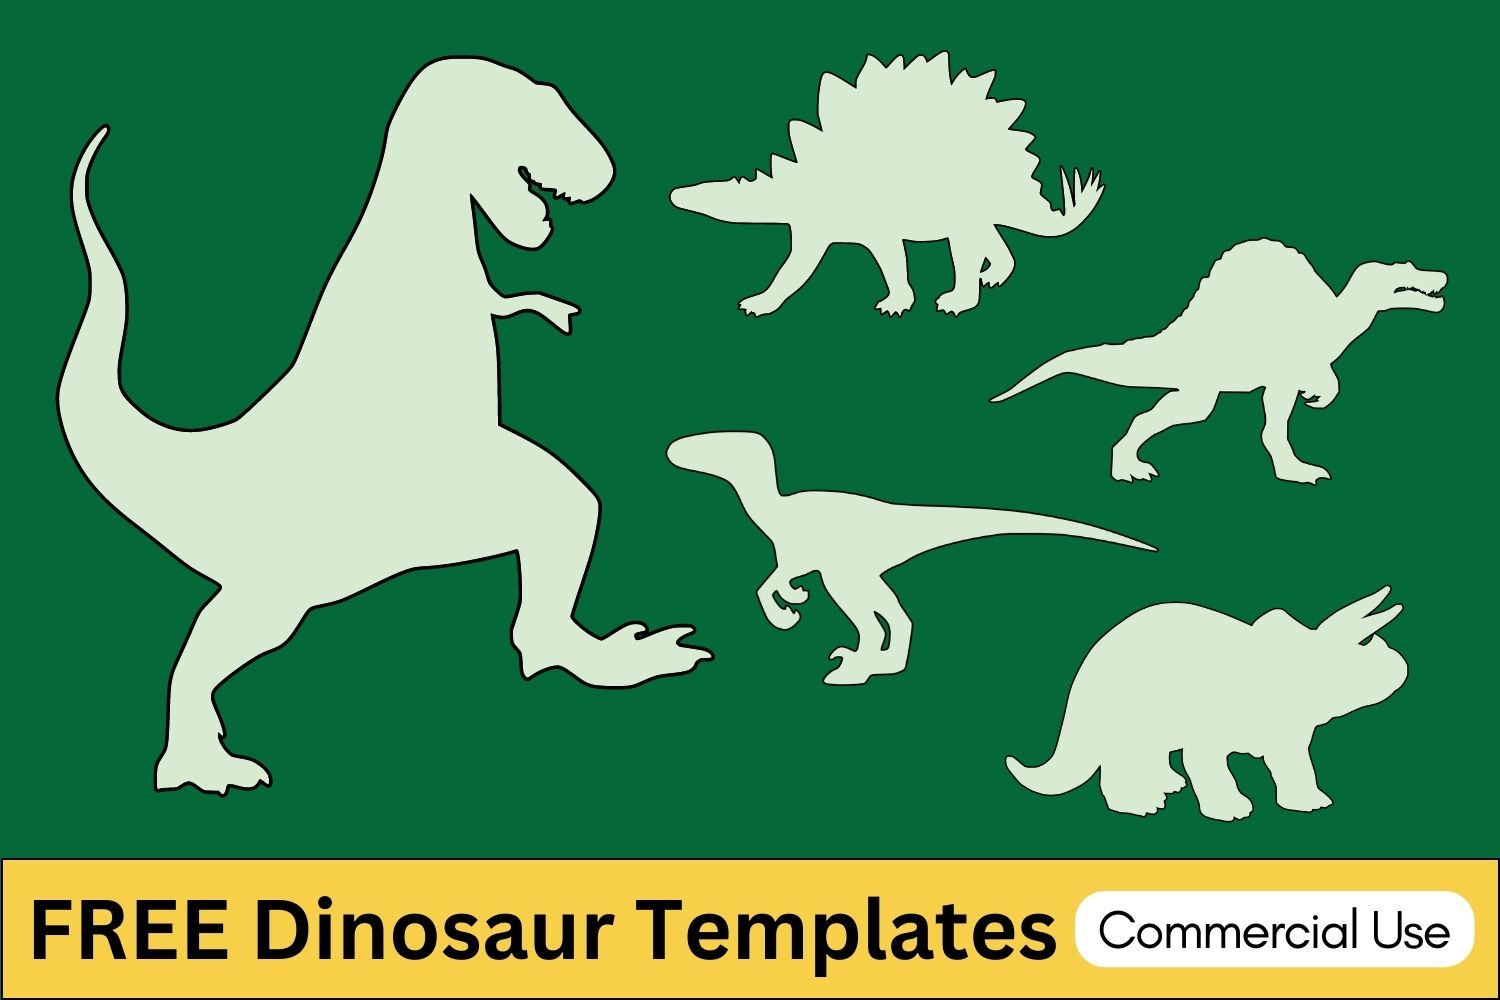 Dinosaur templates, cliparts, printables, vector, cricut, silhouette, fossil, dino, jurassic, animal, cricut, scroll saw, svg, coloring page, quilting pattern, toy, design clipart